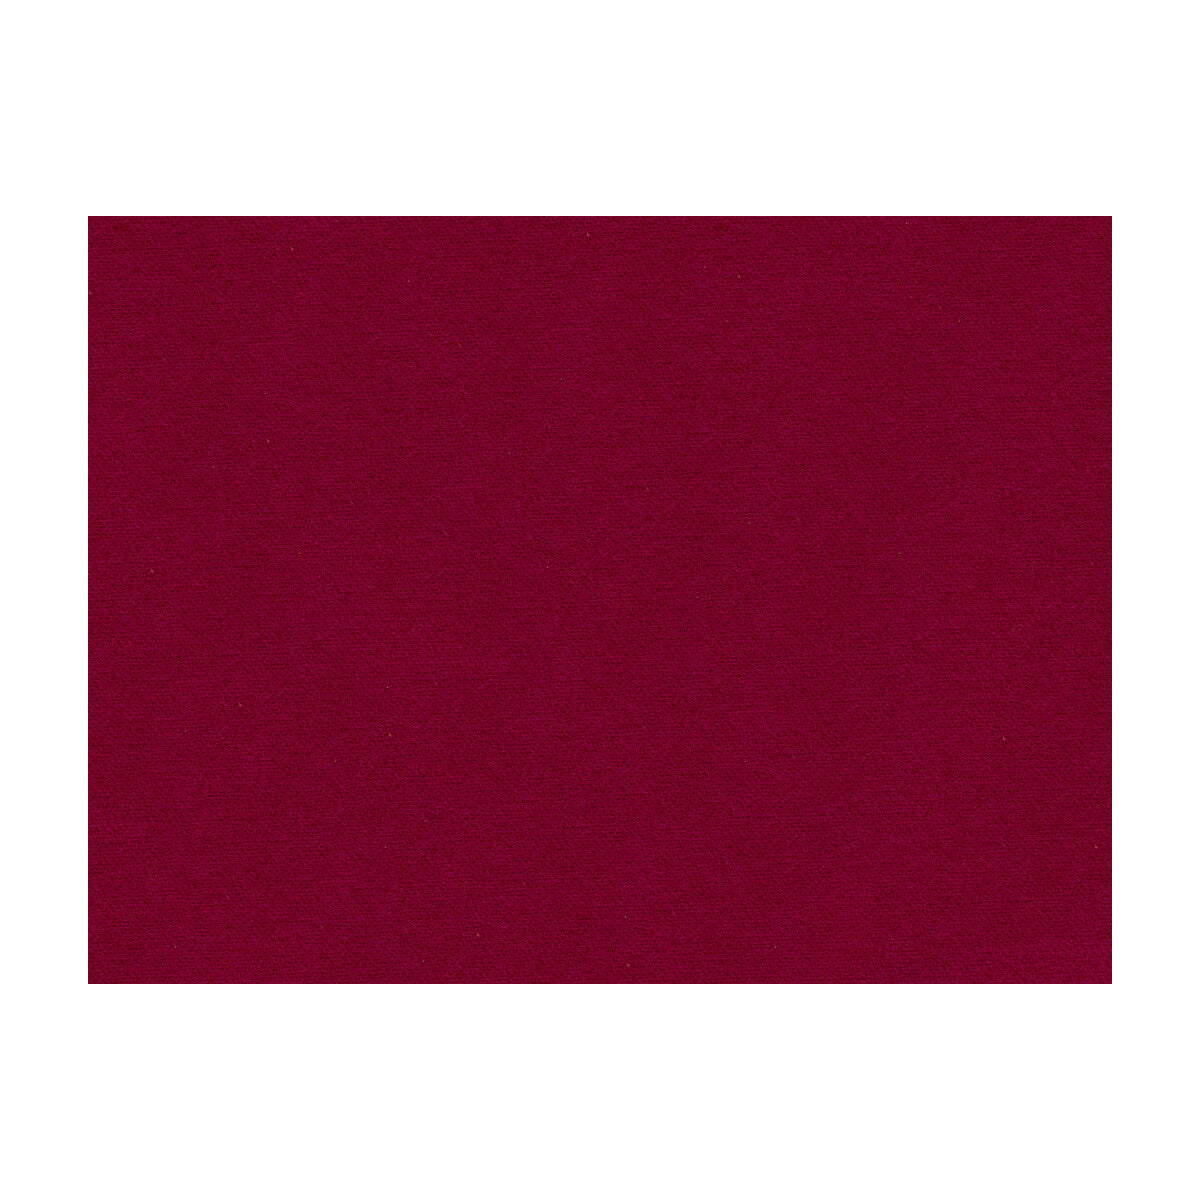 Chevalier Wool fabric in currant color - pattern 8013149.97.0 - by Brunschwig &amp; Fils